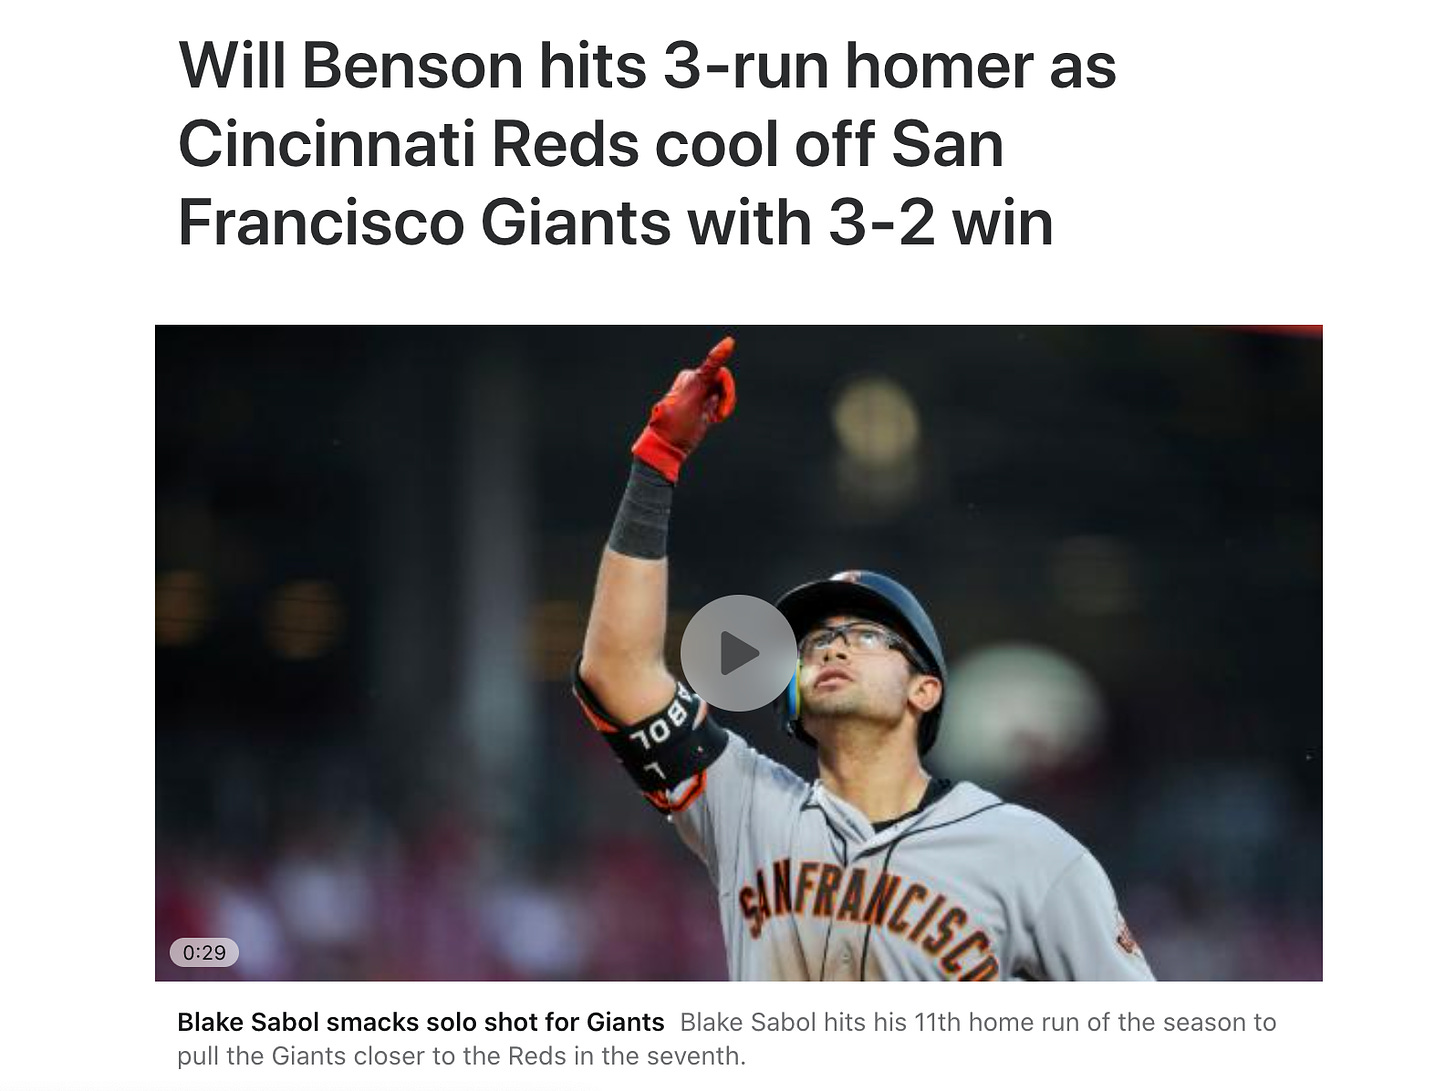 Giants highlight atop a game story about a Red win